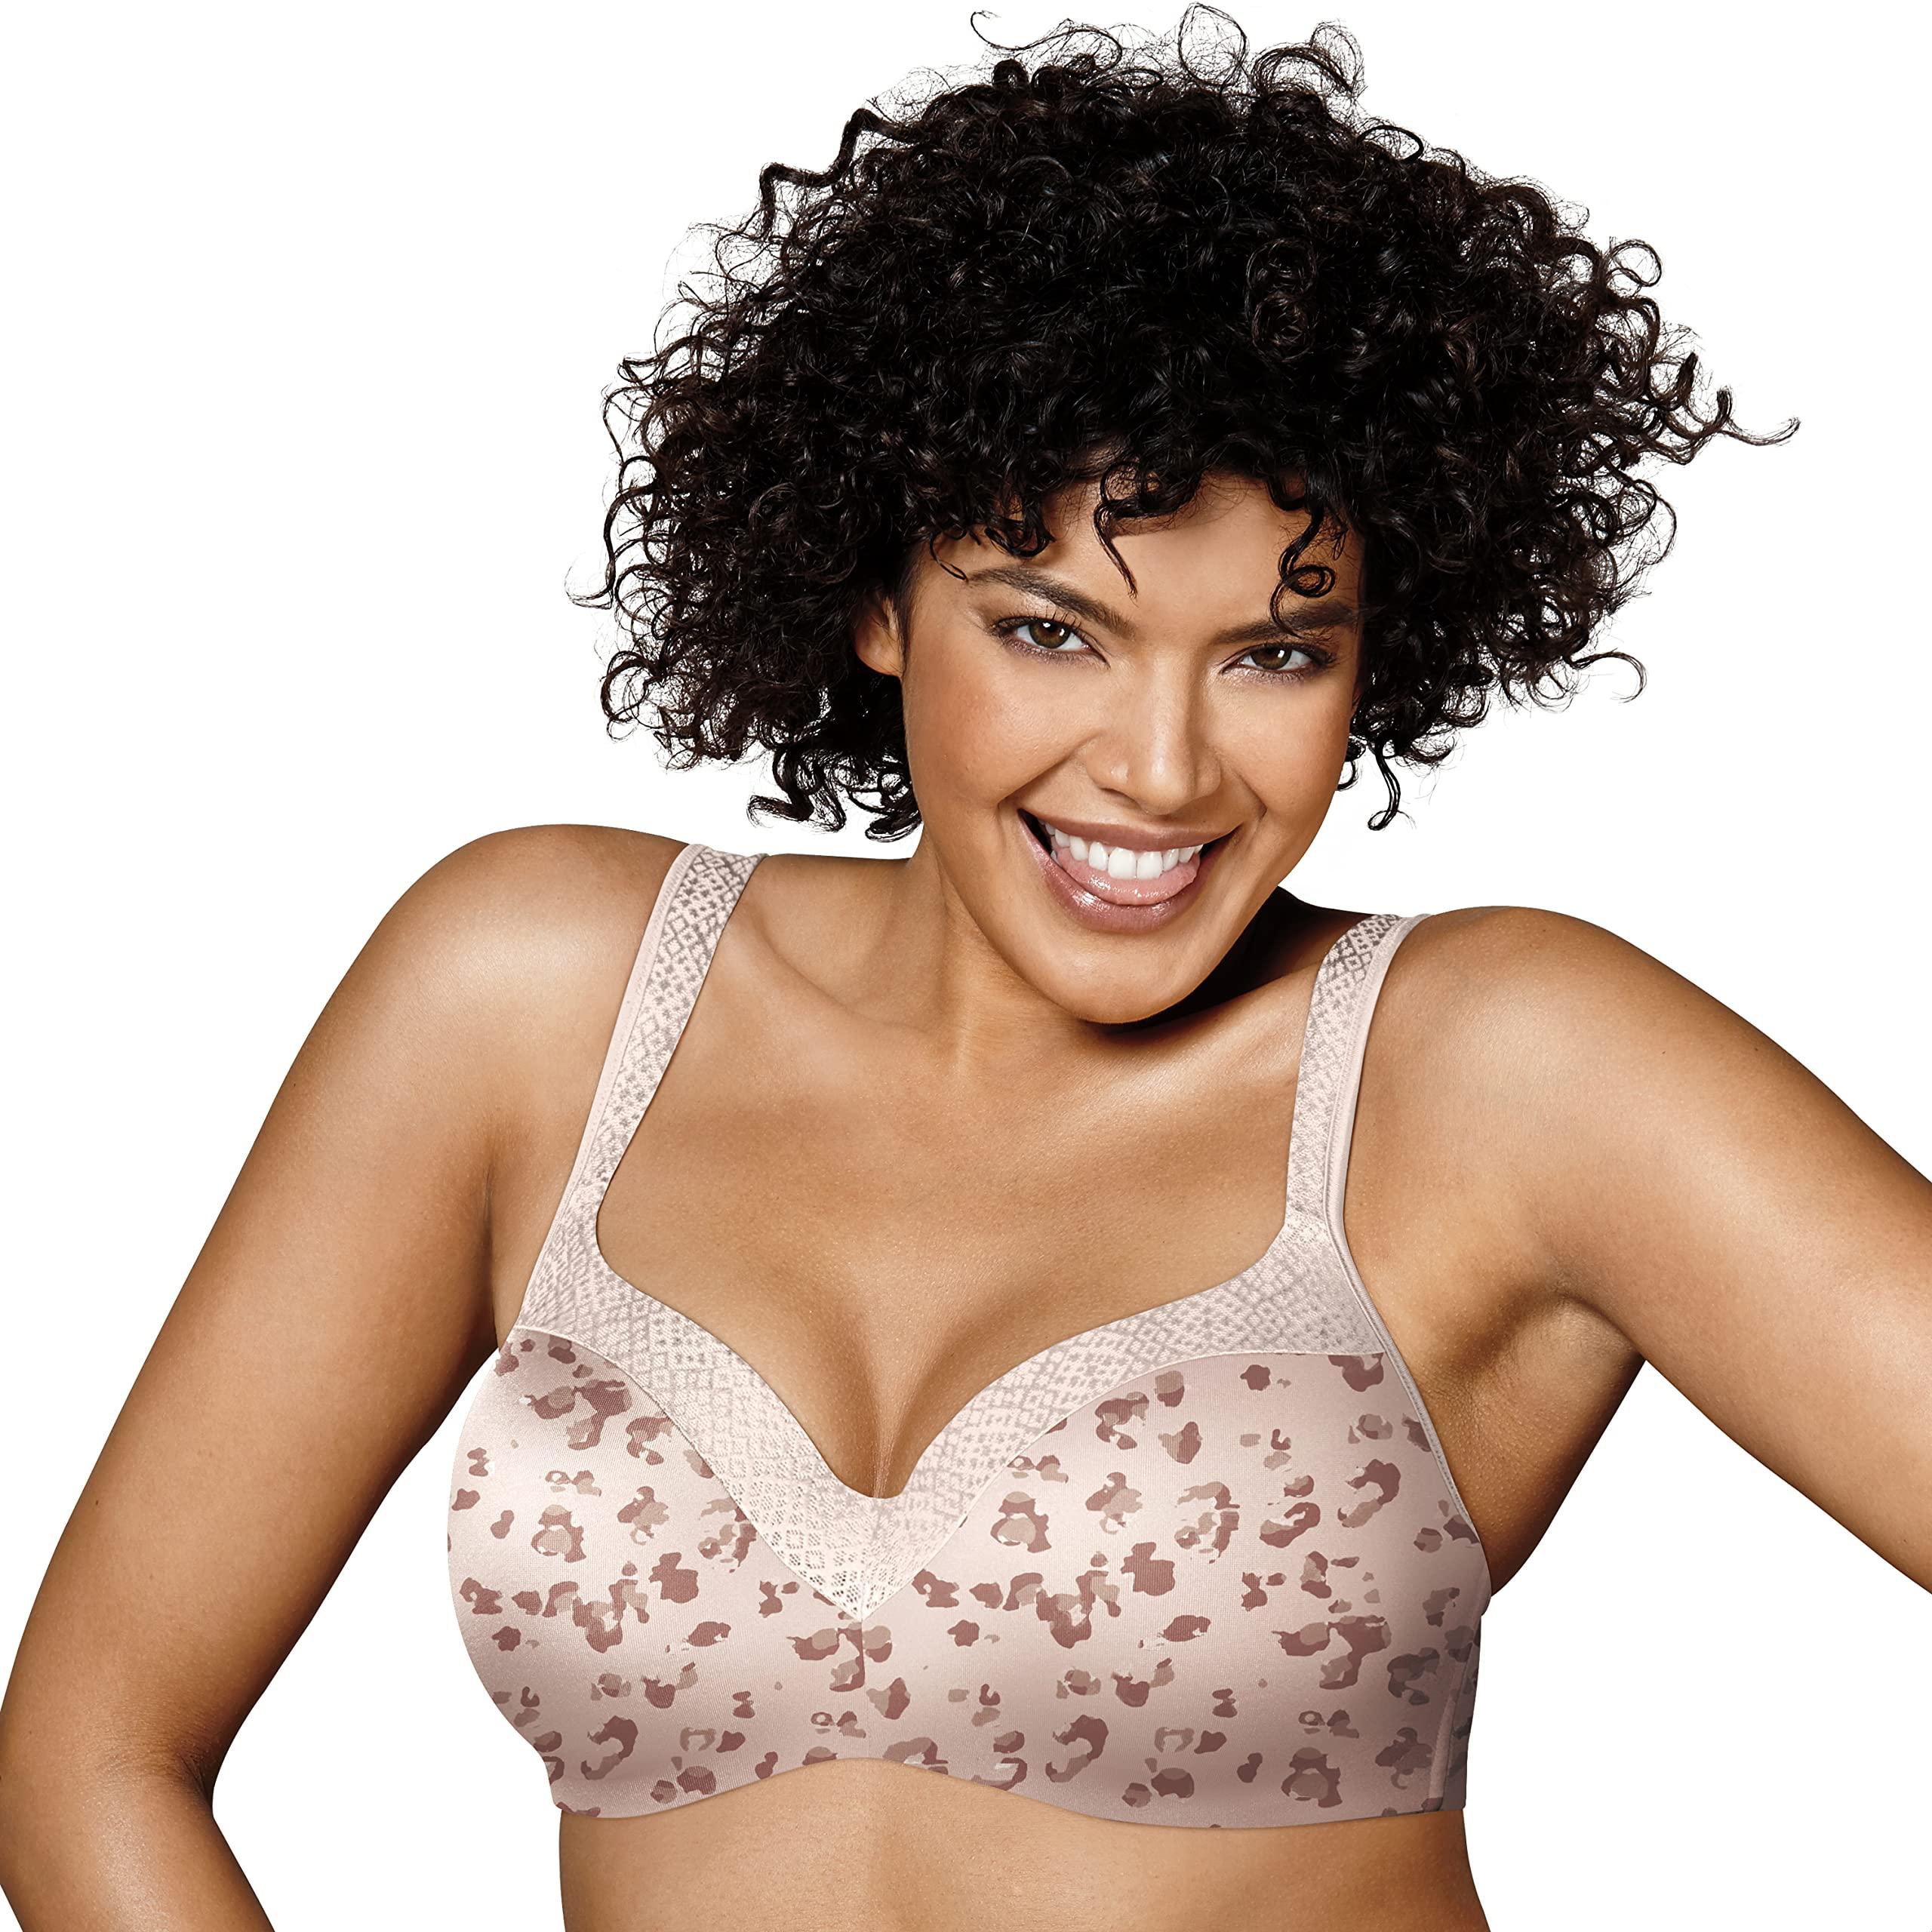 Playtex Women's Secrets All Over Smoothing Full-Figure Underwire